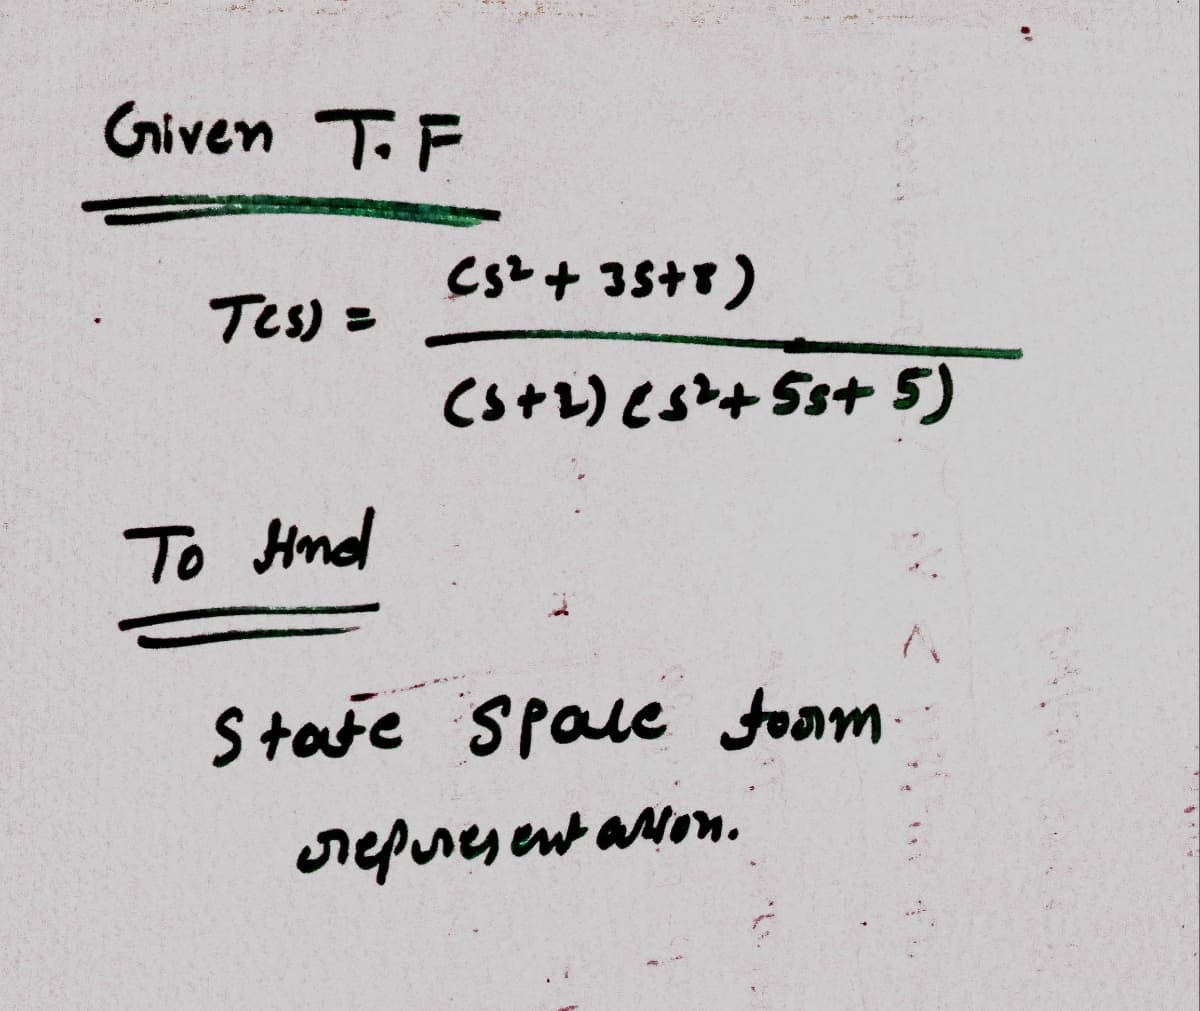 Given T. F
Tes) =
To Hind
(5² + 35+8)
(5+2) cs+ 55+ 5)
State Spale foam
representation.